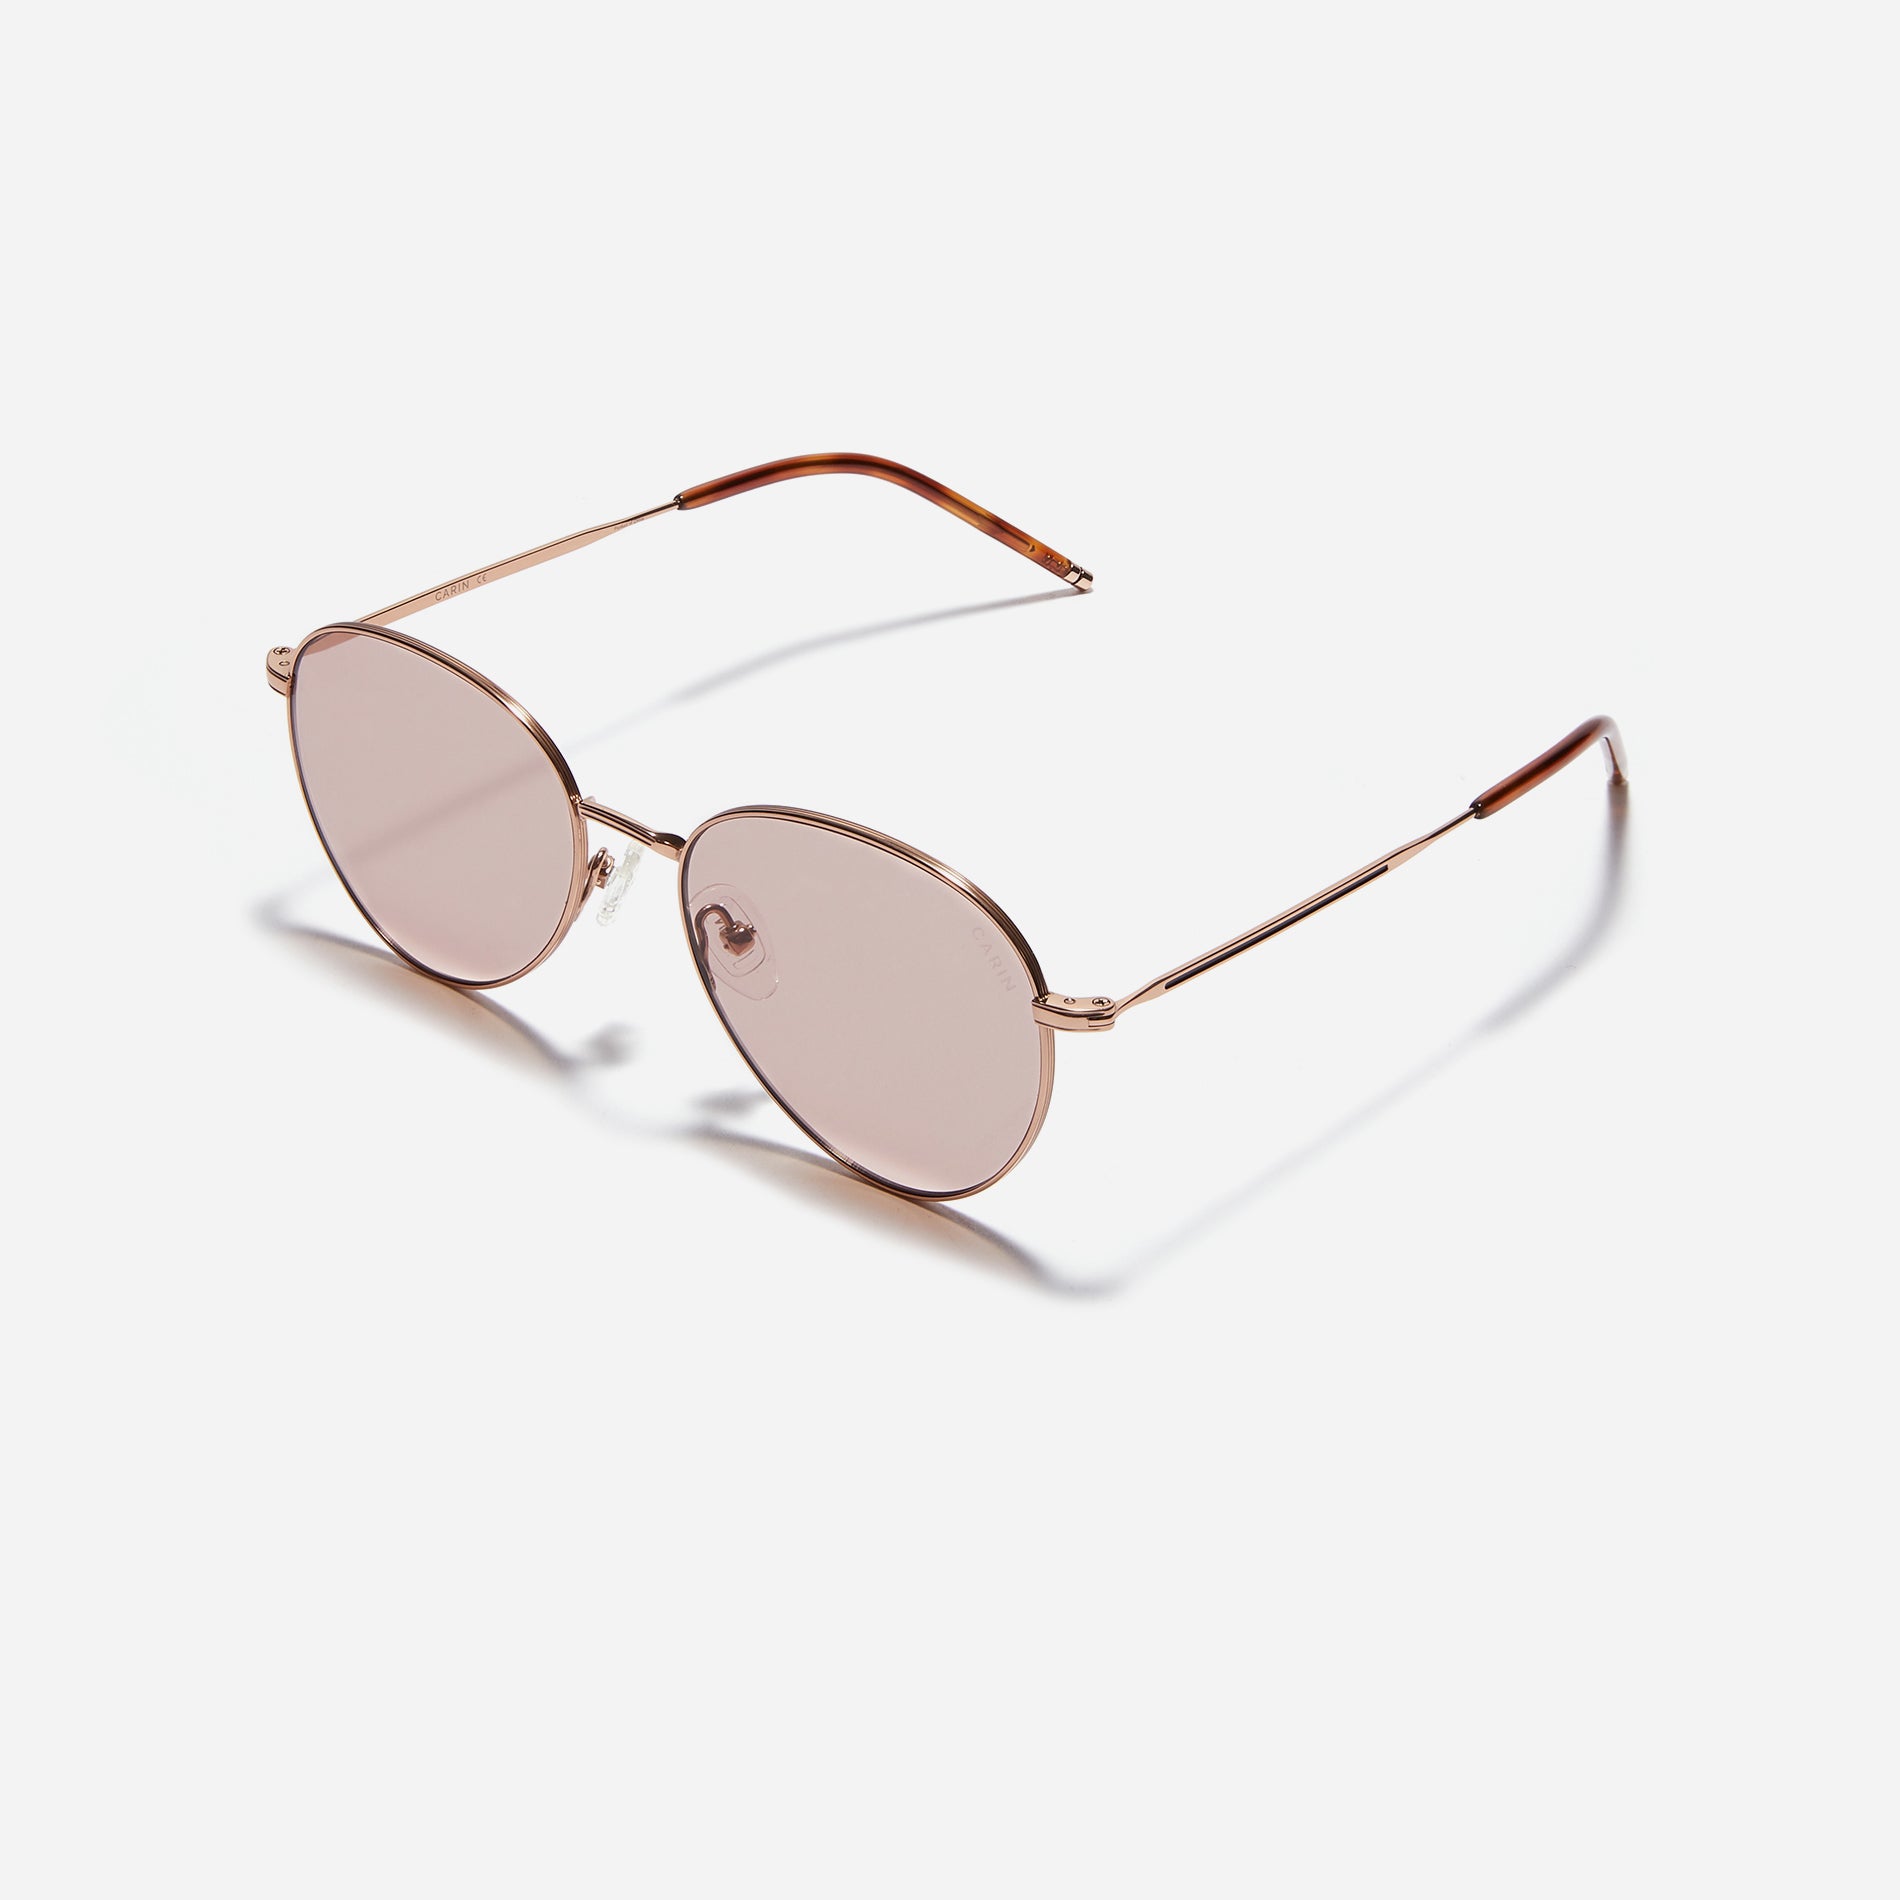 Retro aesthetic Boeing-style sunglasses crafted entirely from titanium.